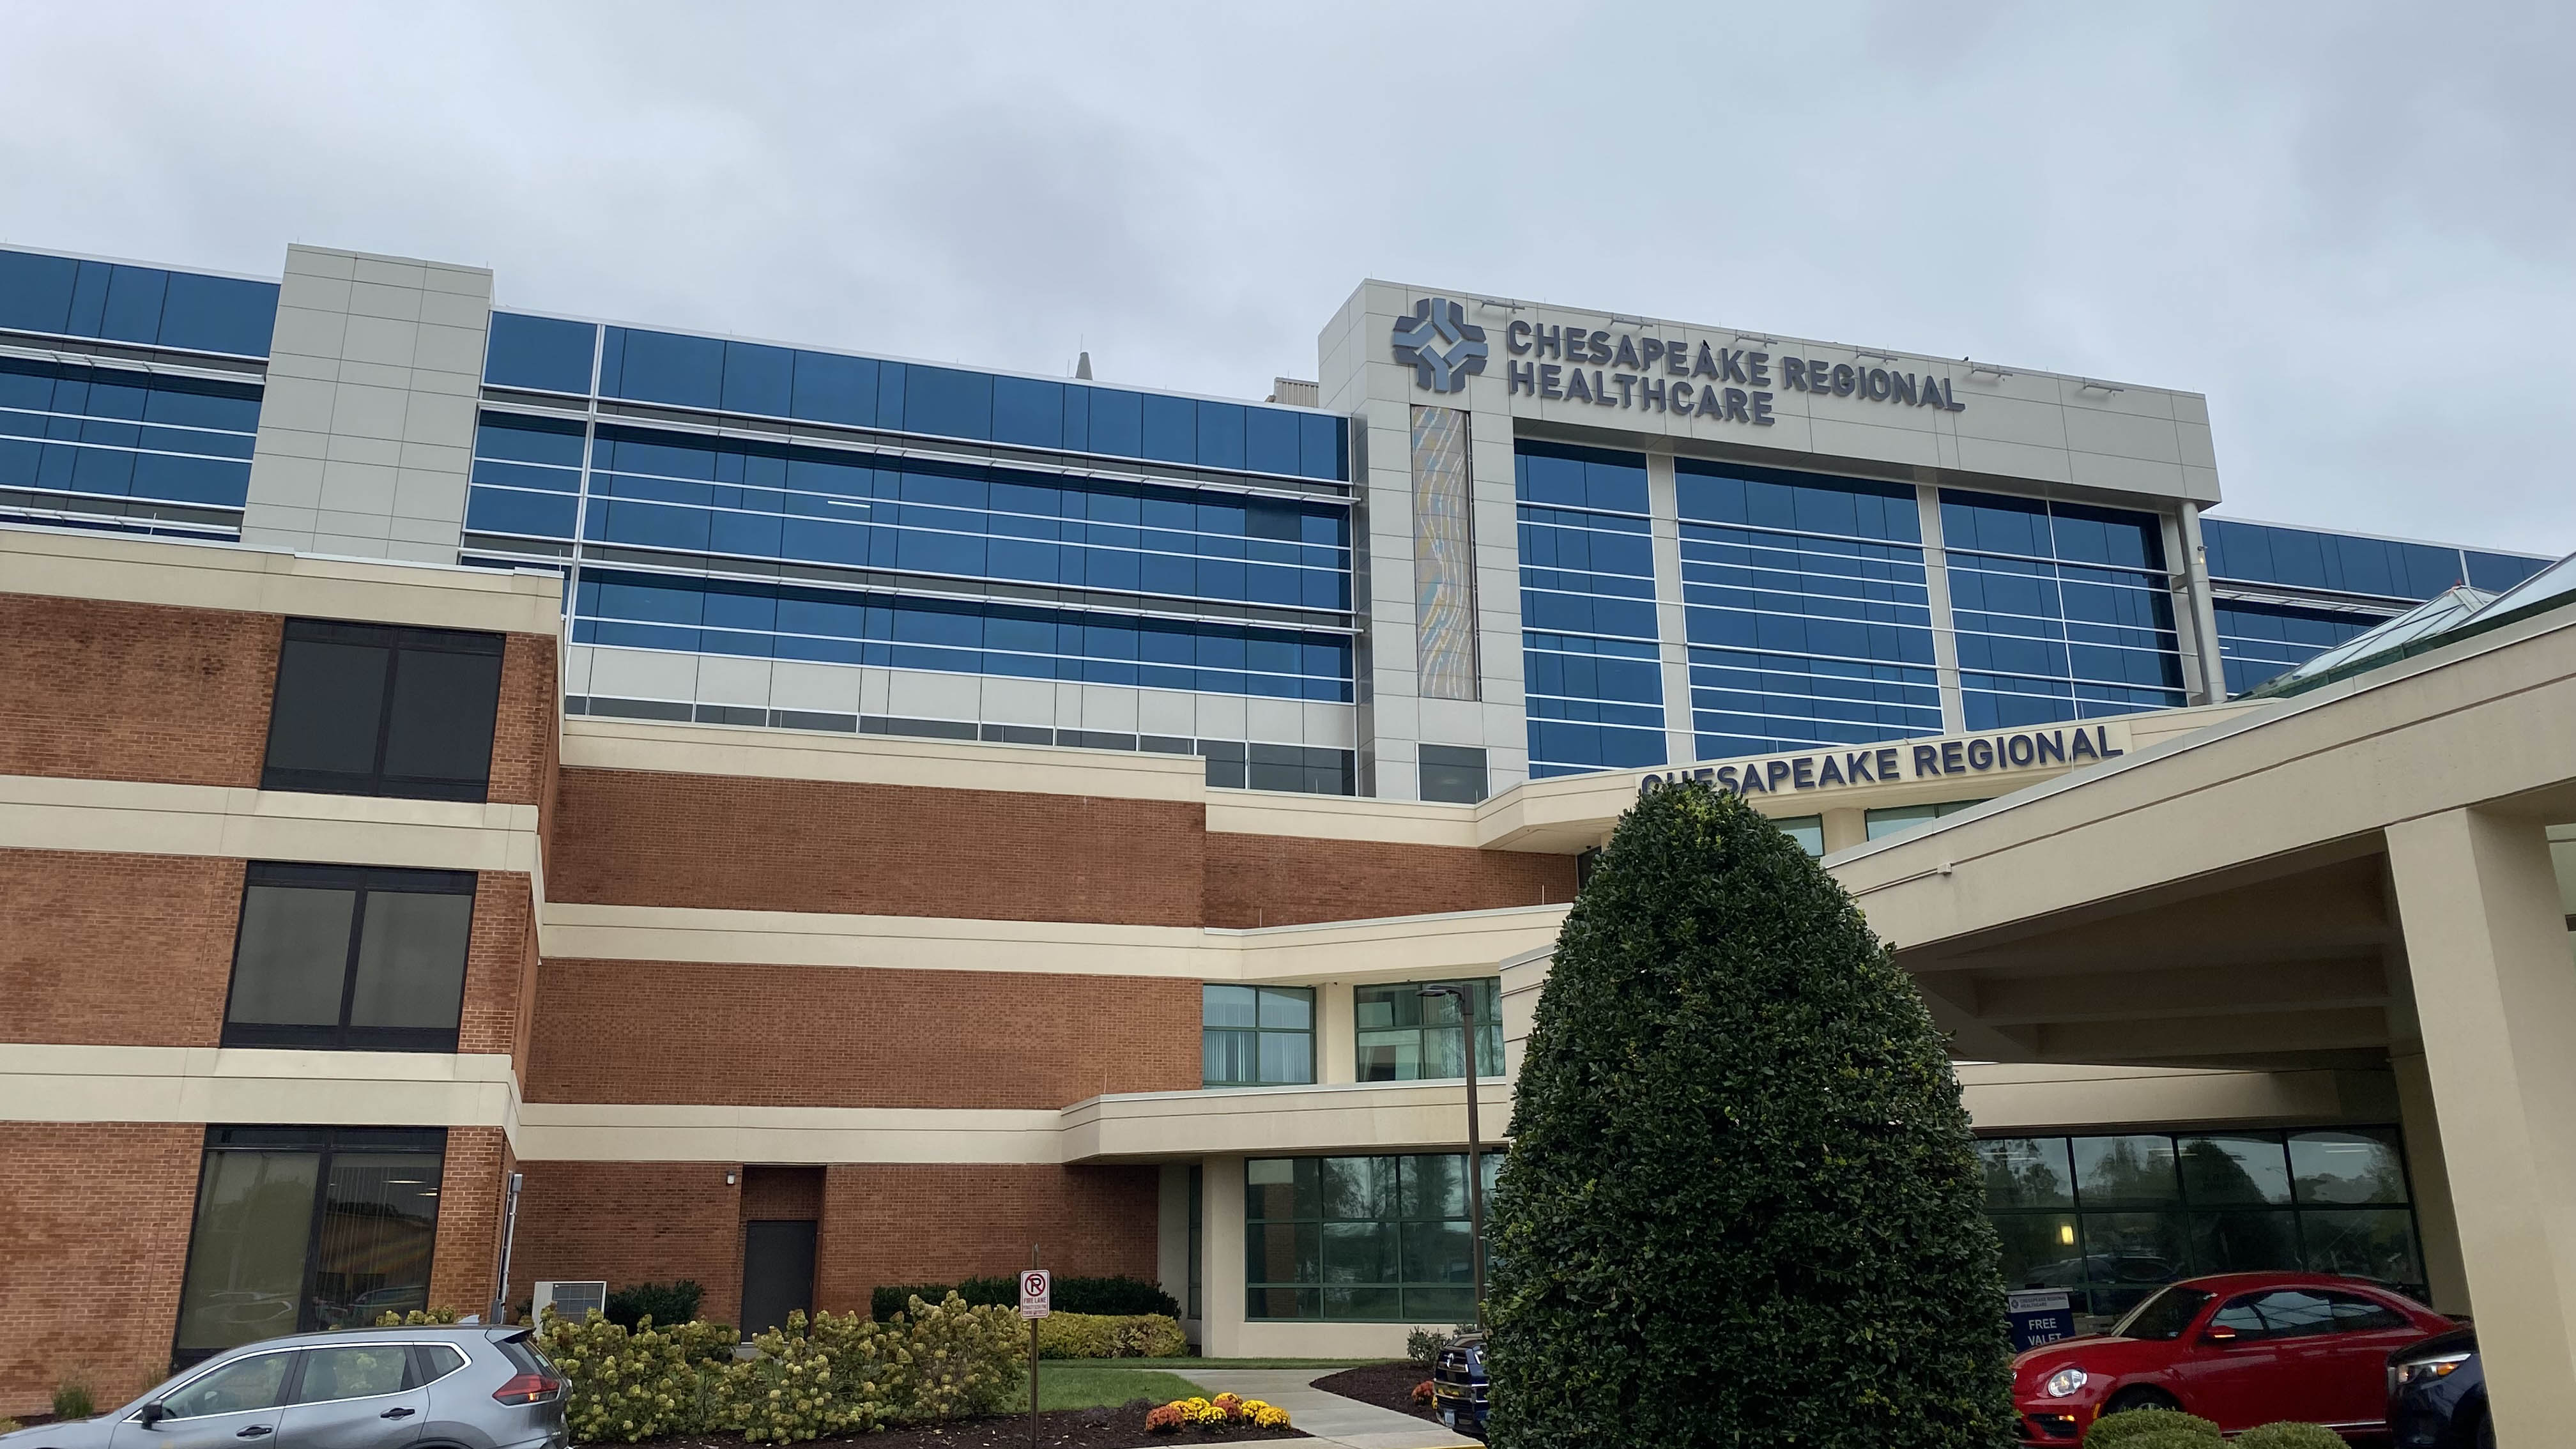 Photo by Katherine Hafner. Chesapeake Regional Medical Center on Battlefield Boulevard on October 4, 2022. The new critical care tower is to the top left of the main entrance.